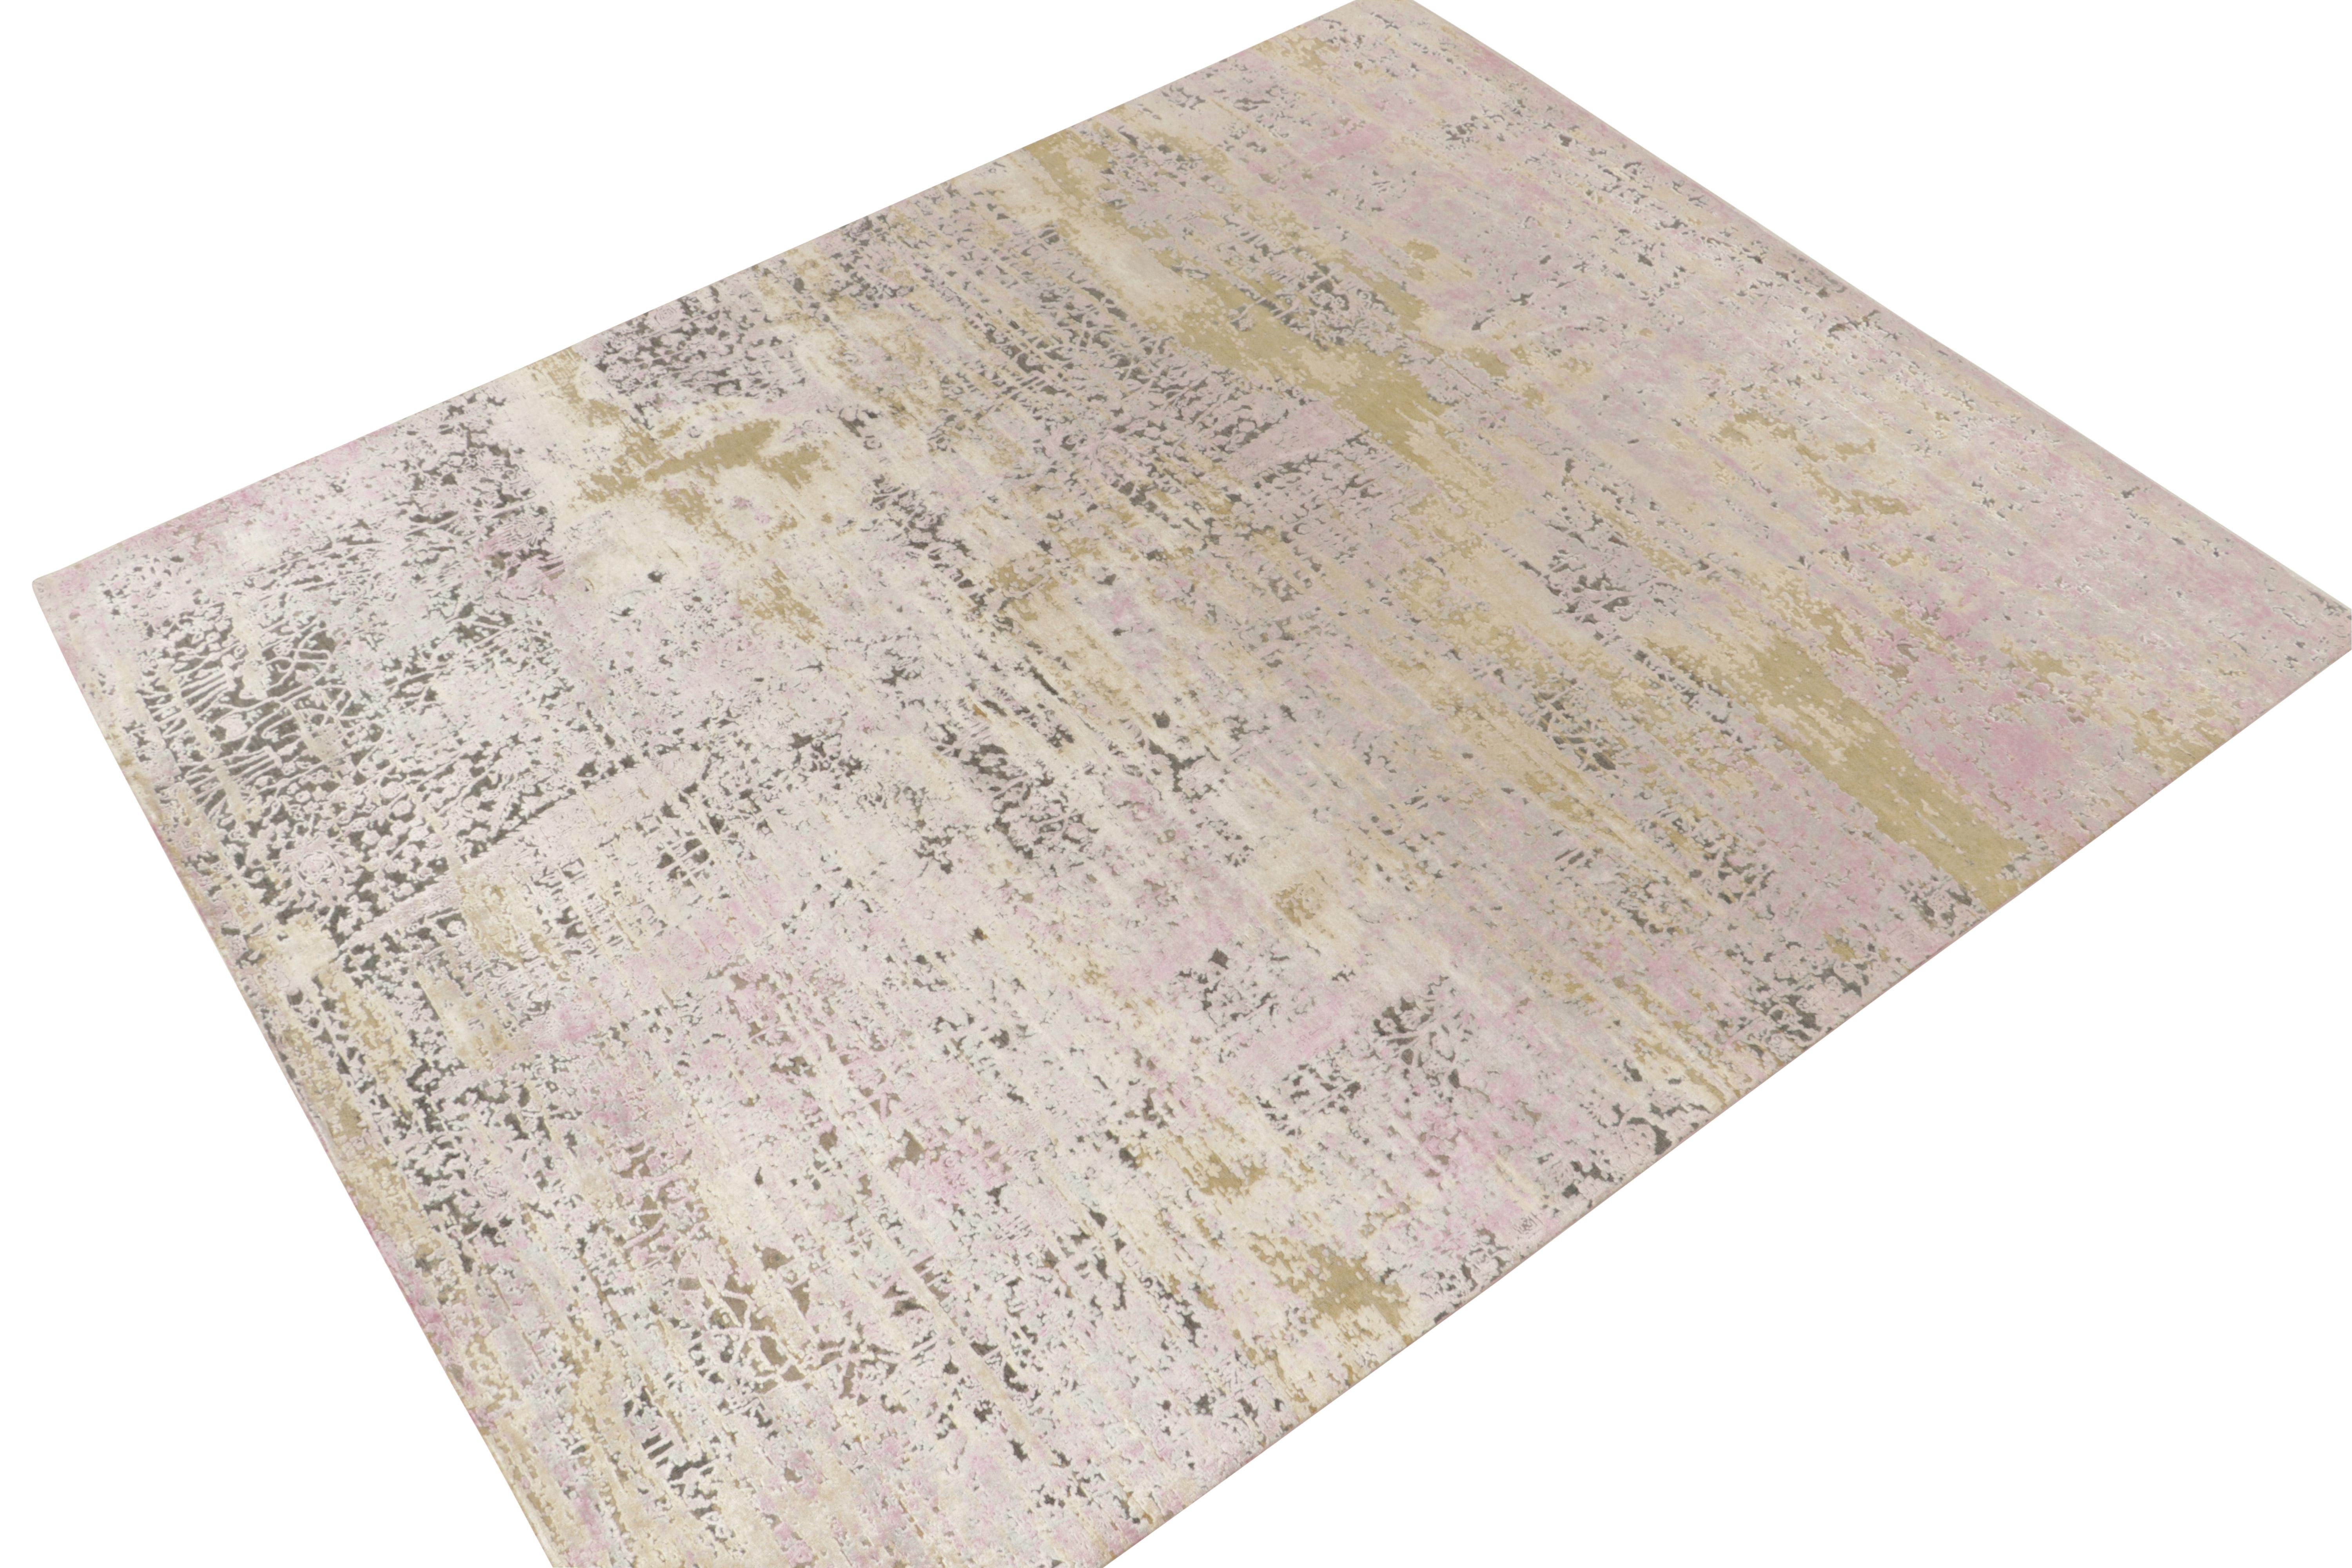 Hand-knotted in a fine blend of wool & silk, a fabulous 8x10 abstract rug from Rug & Kilim’s bold modern designs. 

The colorway enjoys a play of pink with beige-brown & silver-gray hues with a painterly attitude and elegant sheen from the